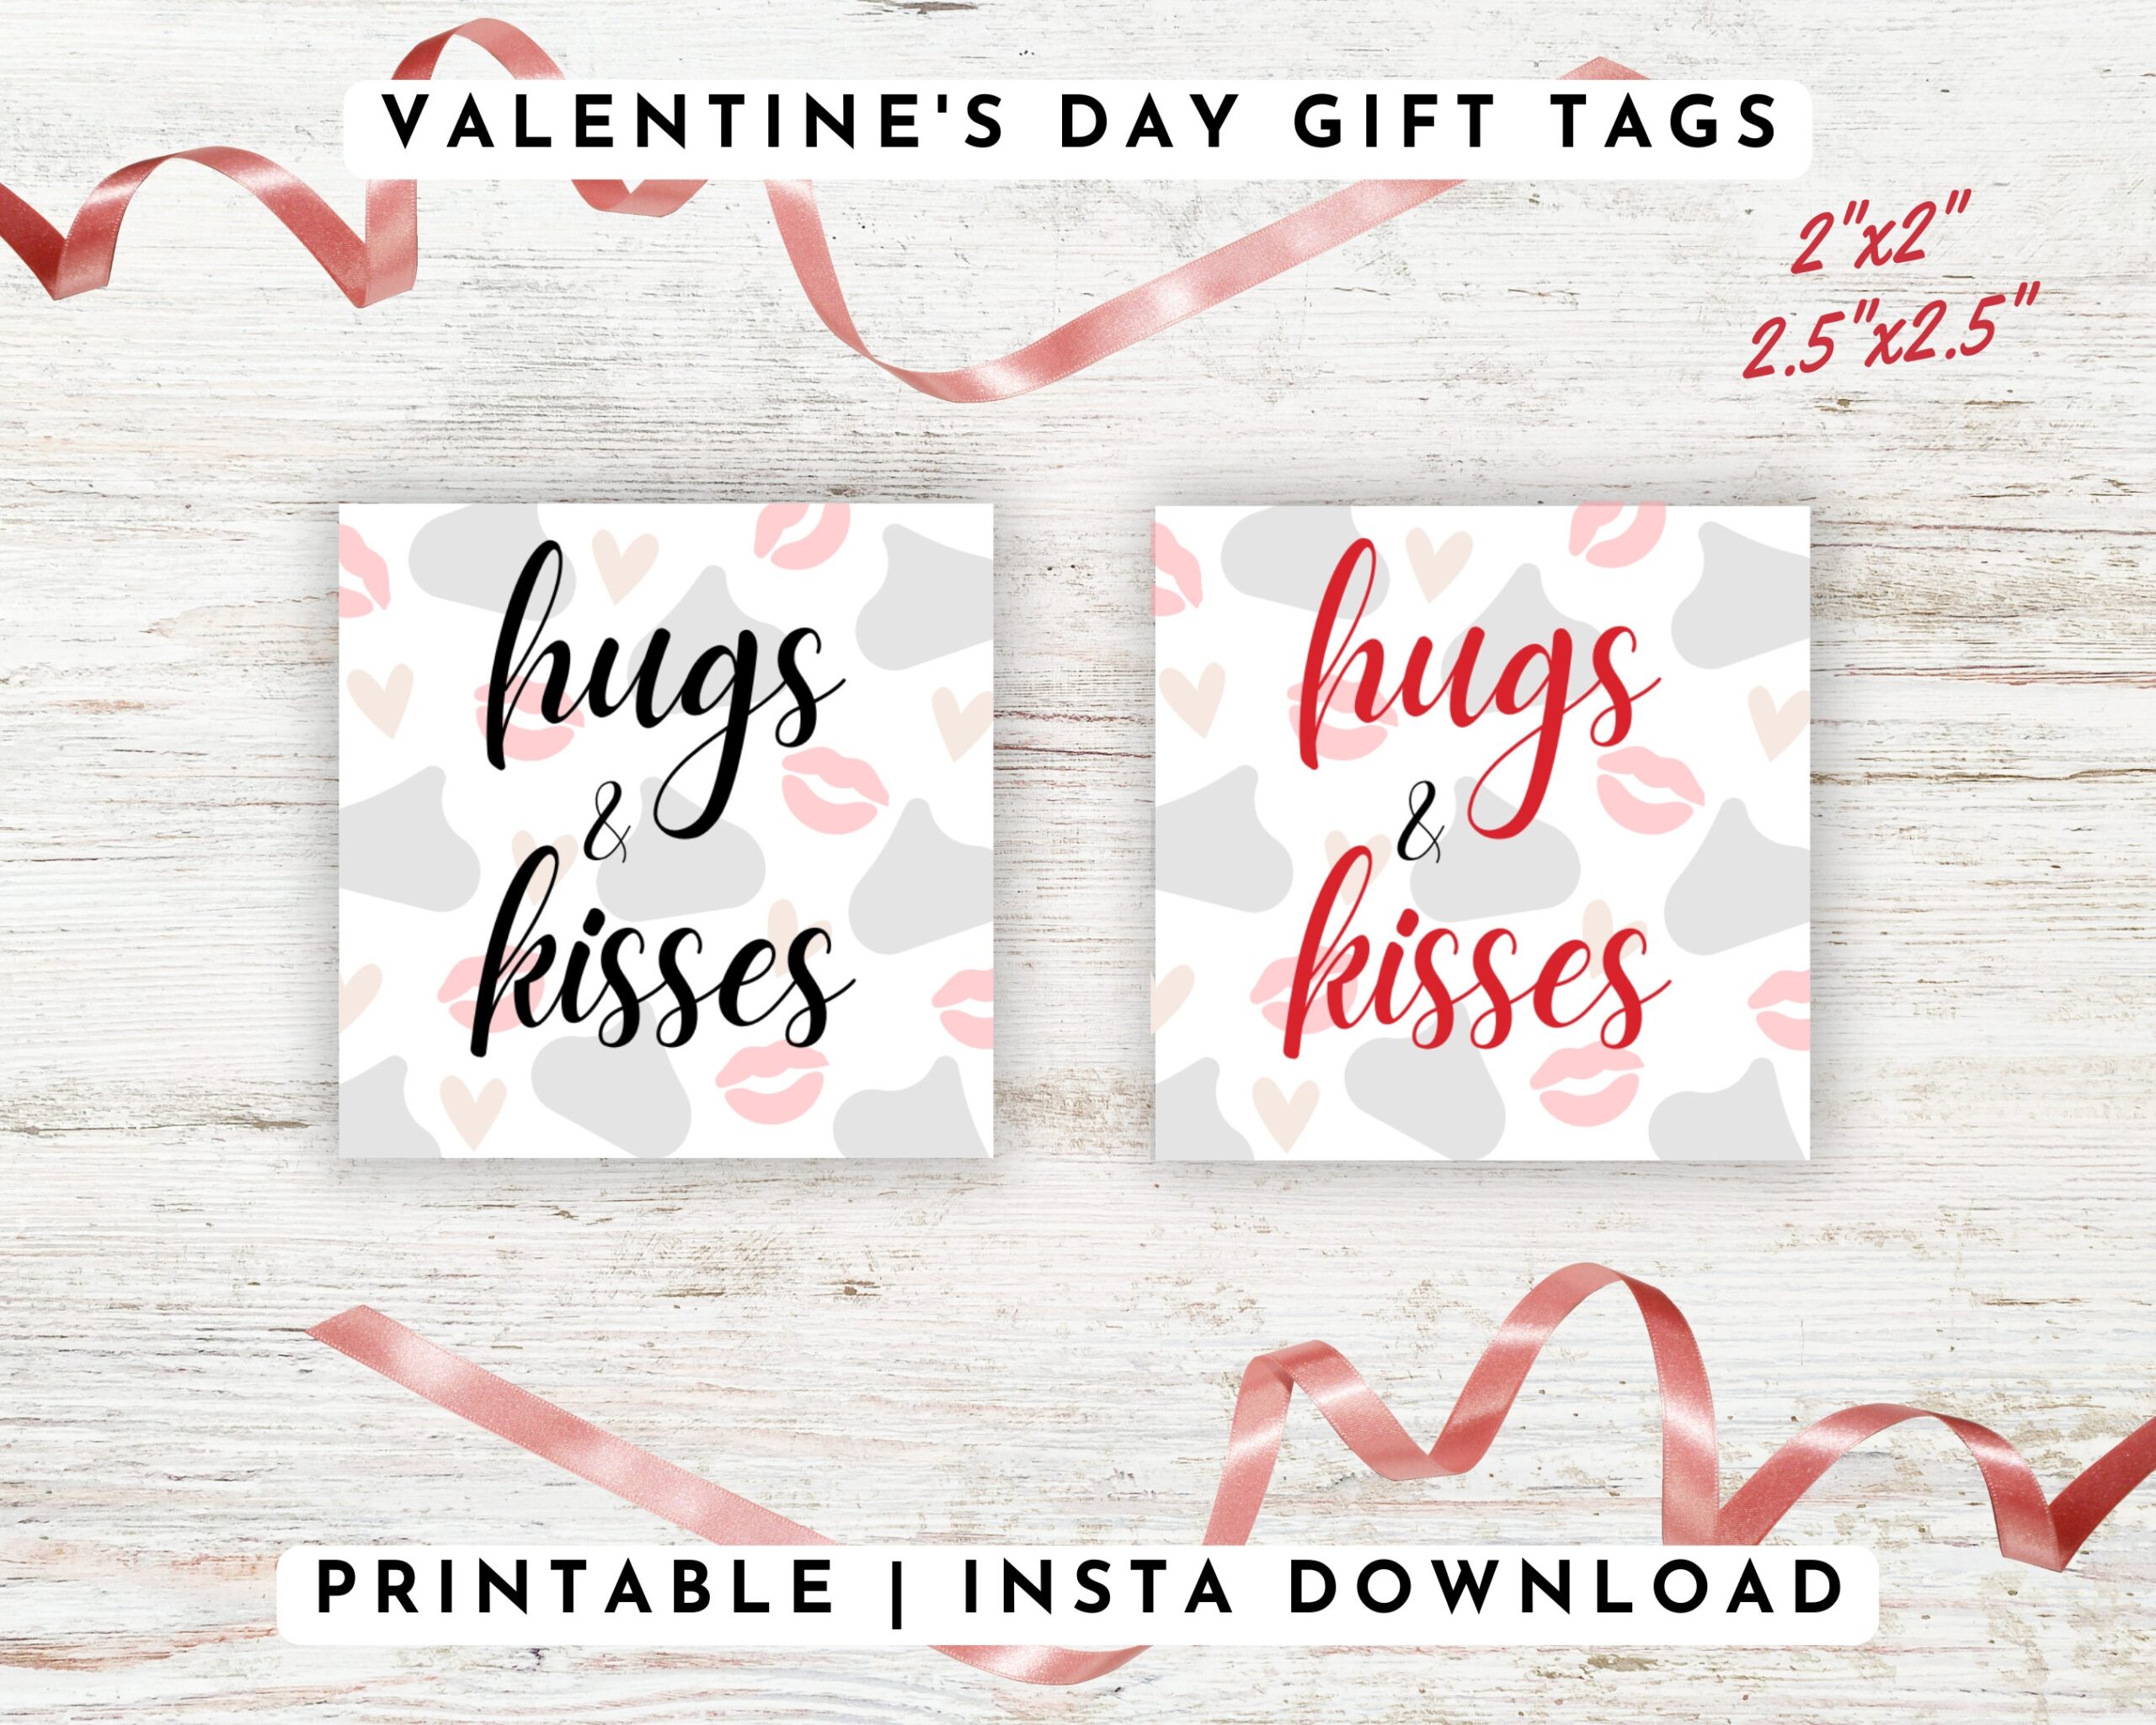 Hugs And Kisses Printable Valentine s Day Gift Tags Set Of 2 Printable Cookie Tag Cookie Gift Bag Cards Instant Download Etsy